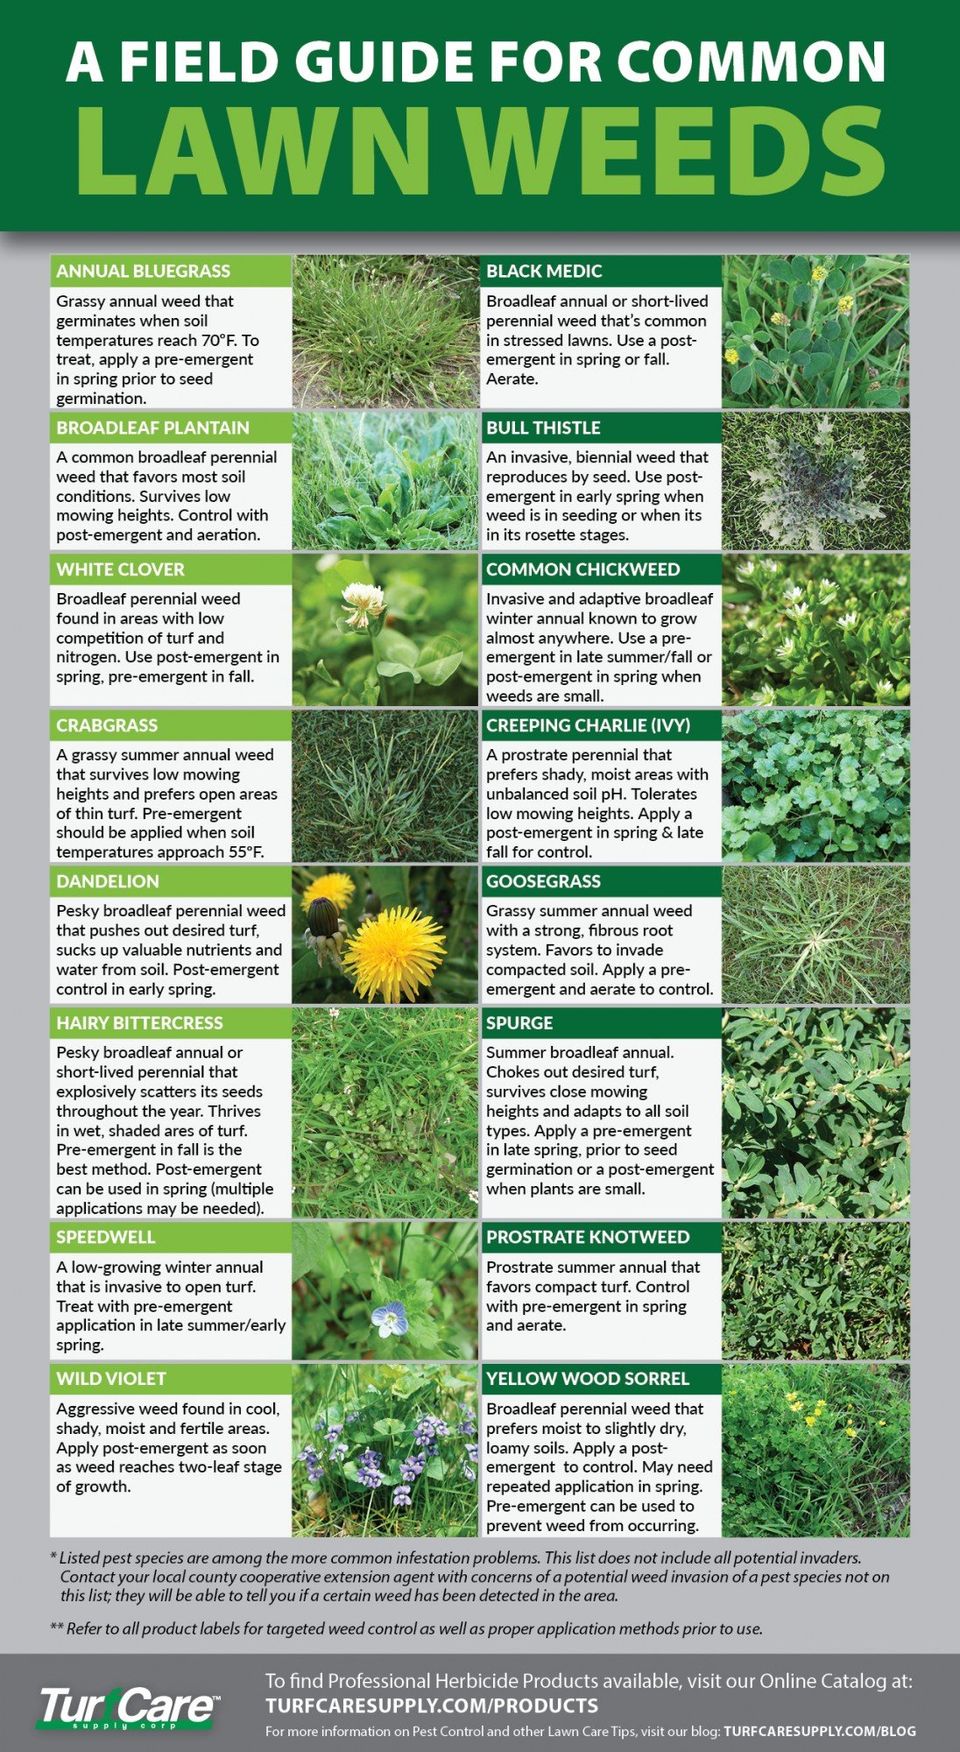 a-field-guide-for-common-lawn-weeds